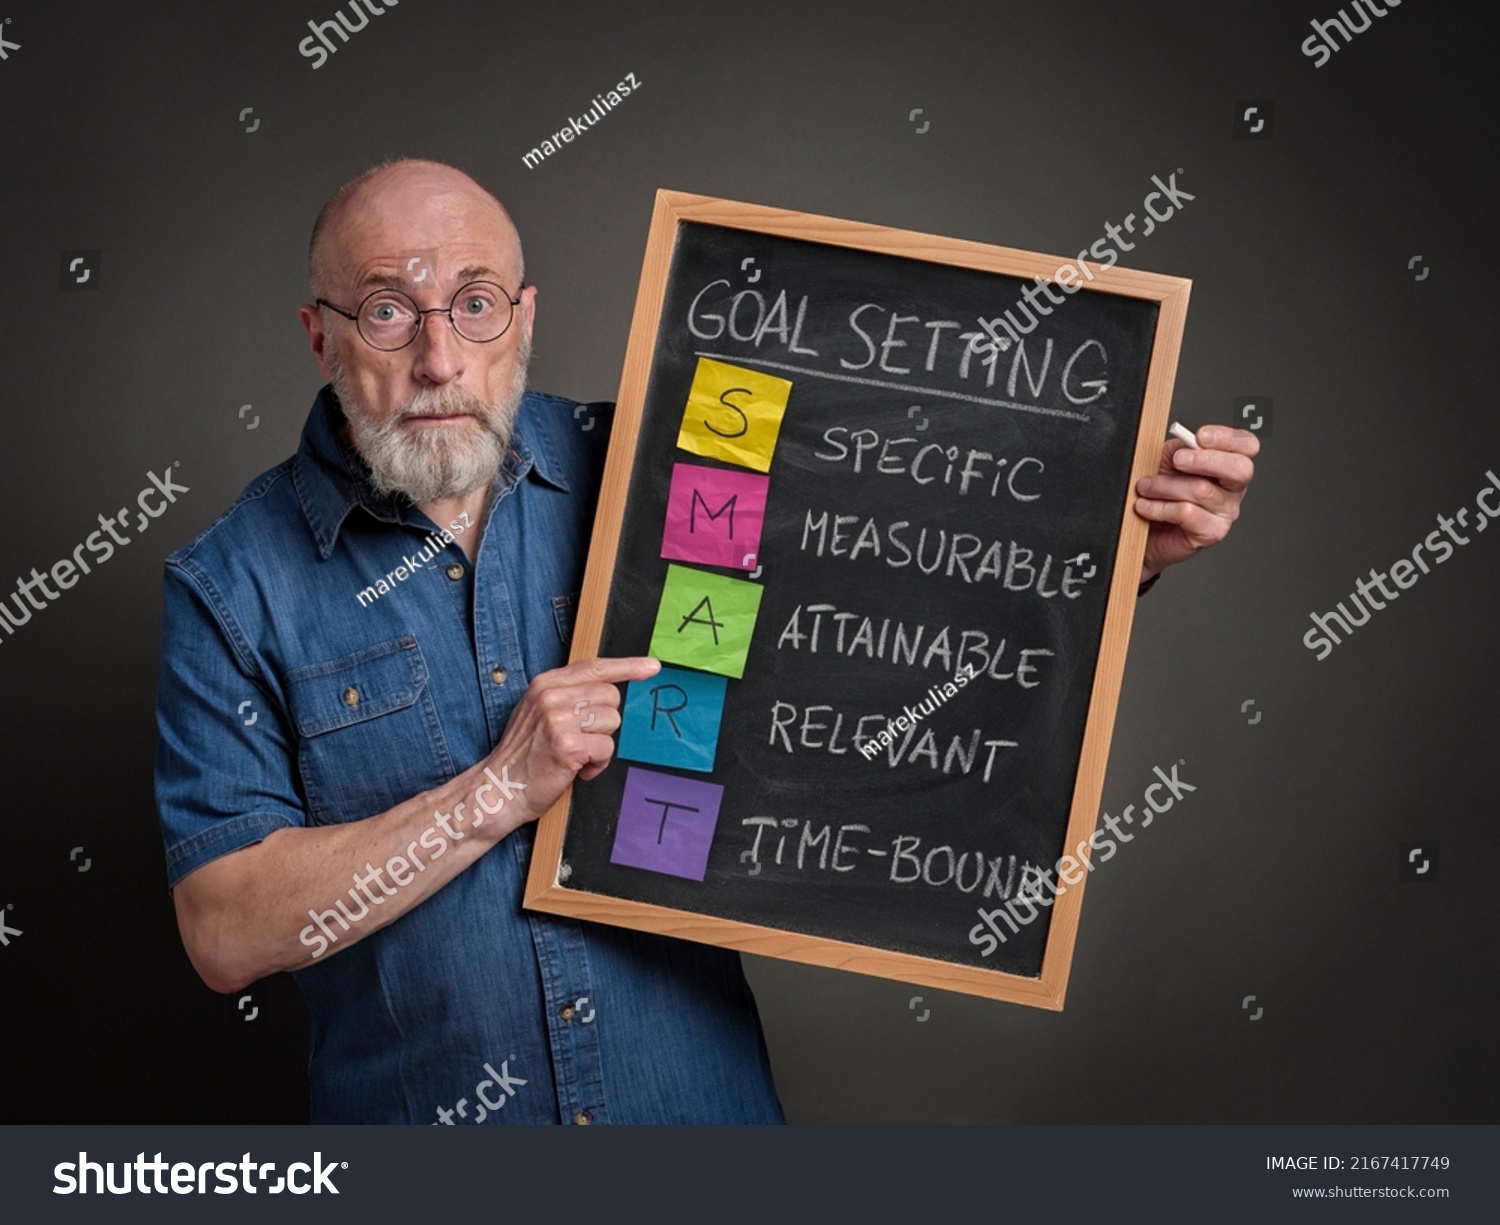 SMART goals ((Specific, Measurable, Attainable, Relevant, Time-bound), Senior man is sharing goal setting methodology on a blackboard. #2167417749